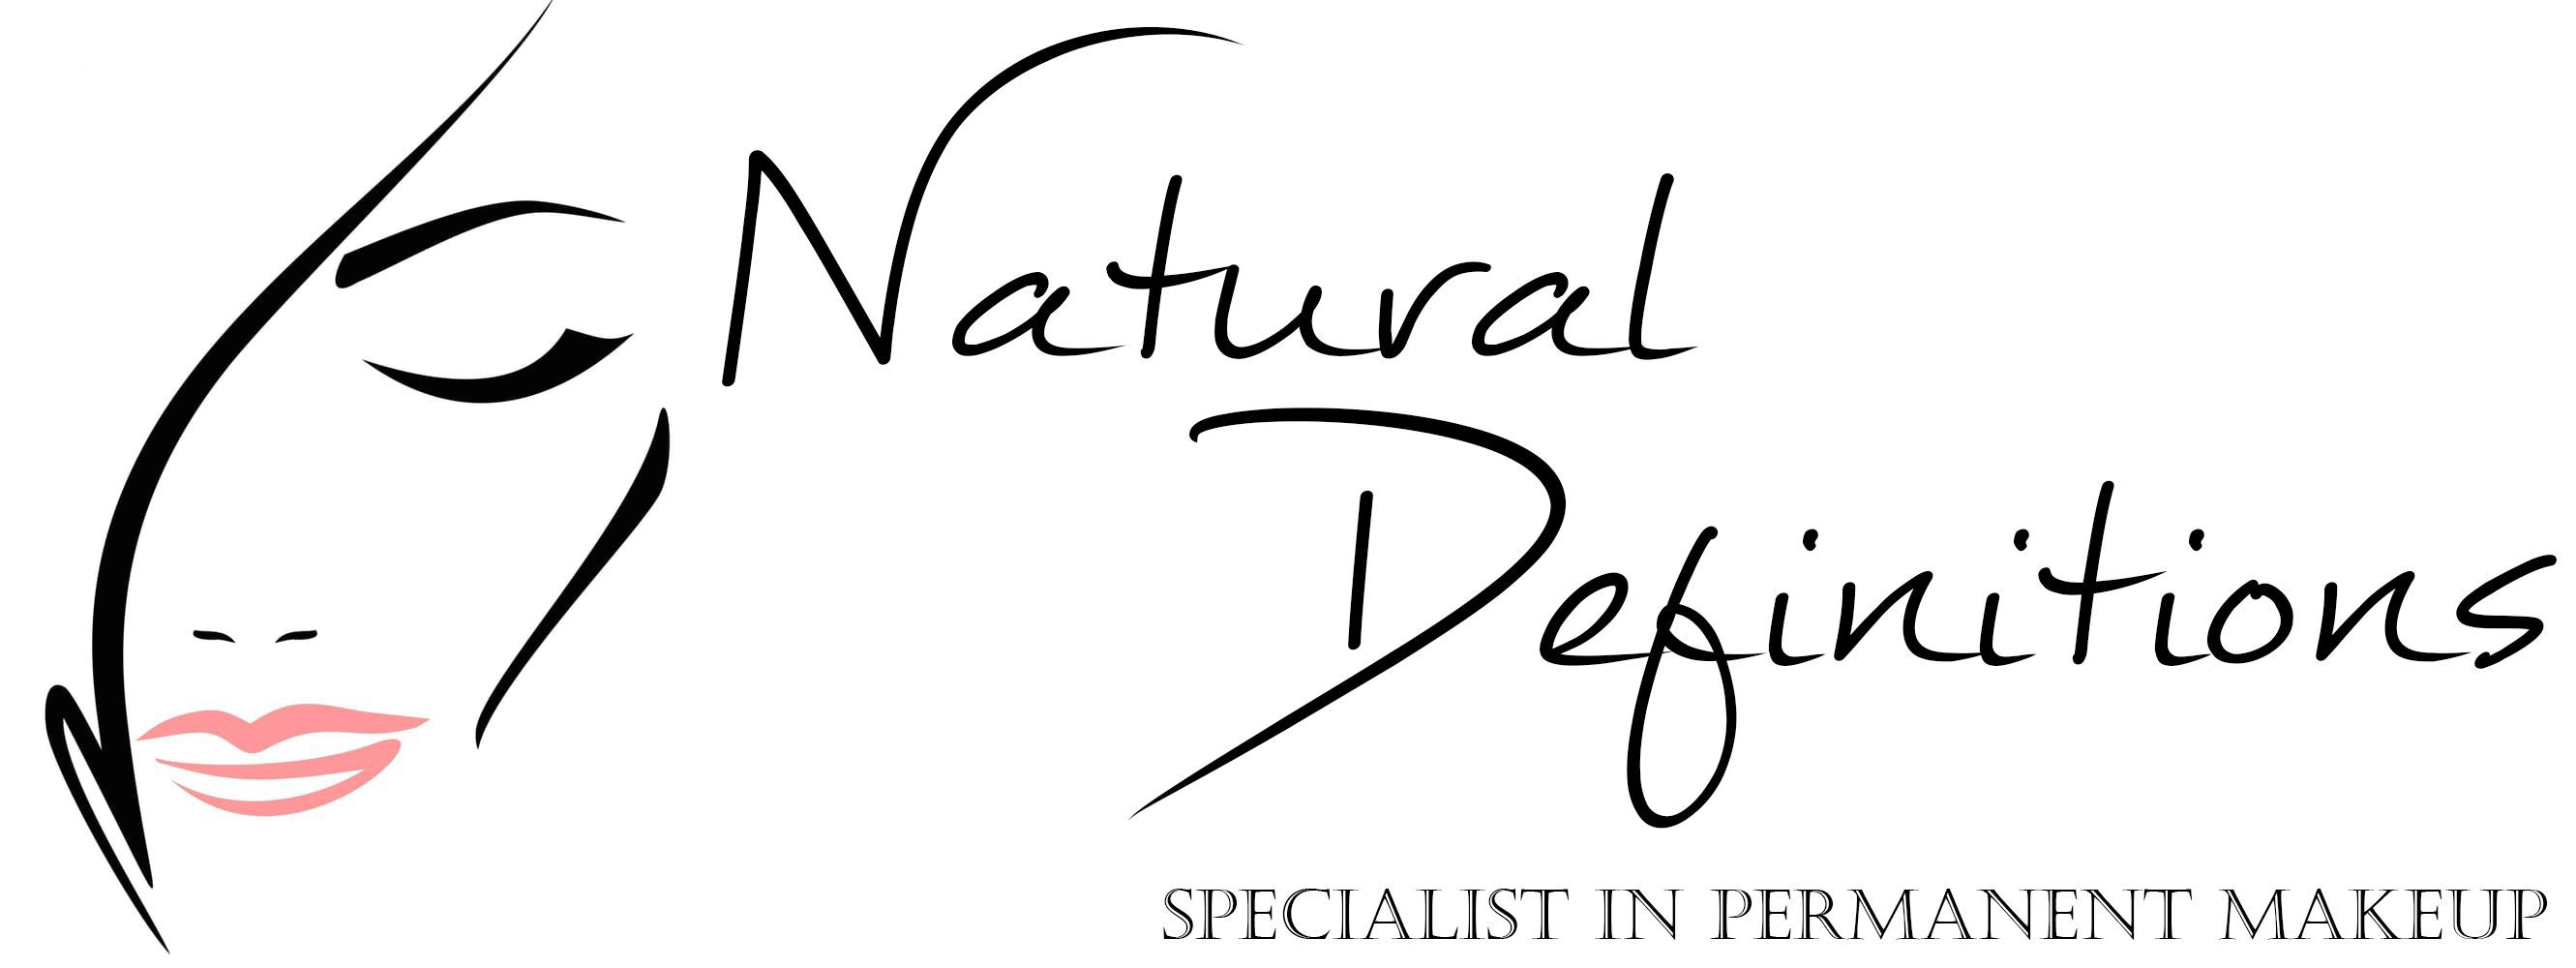 Natural Definitions